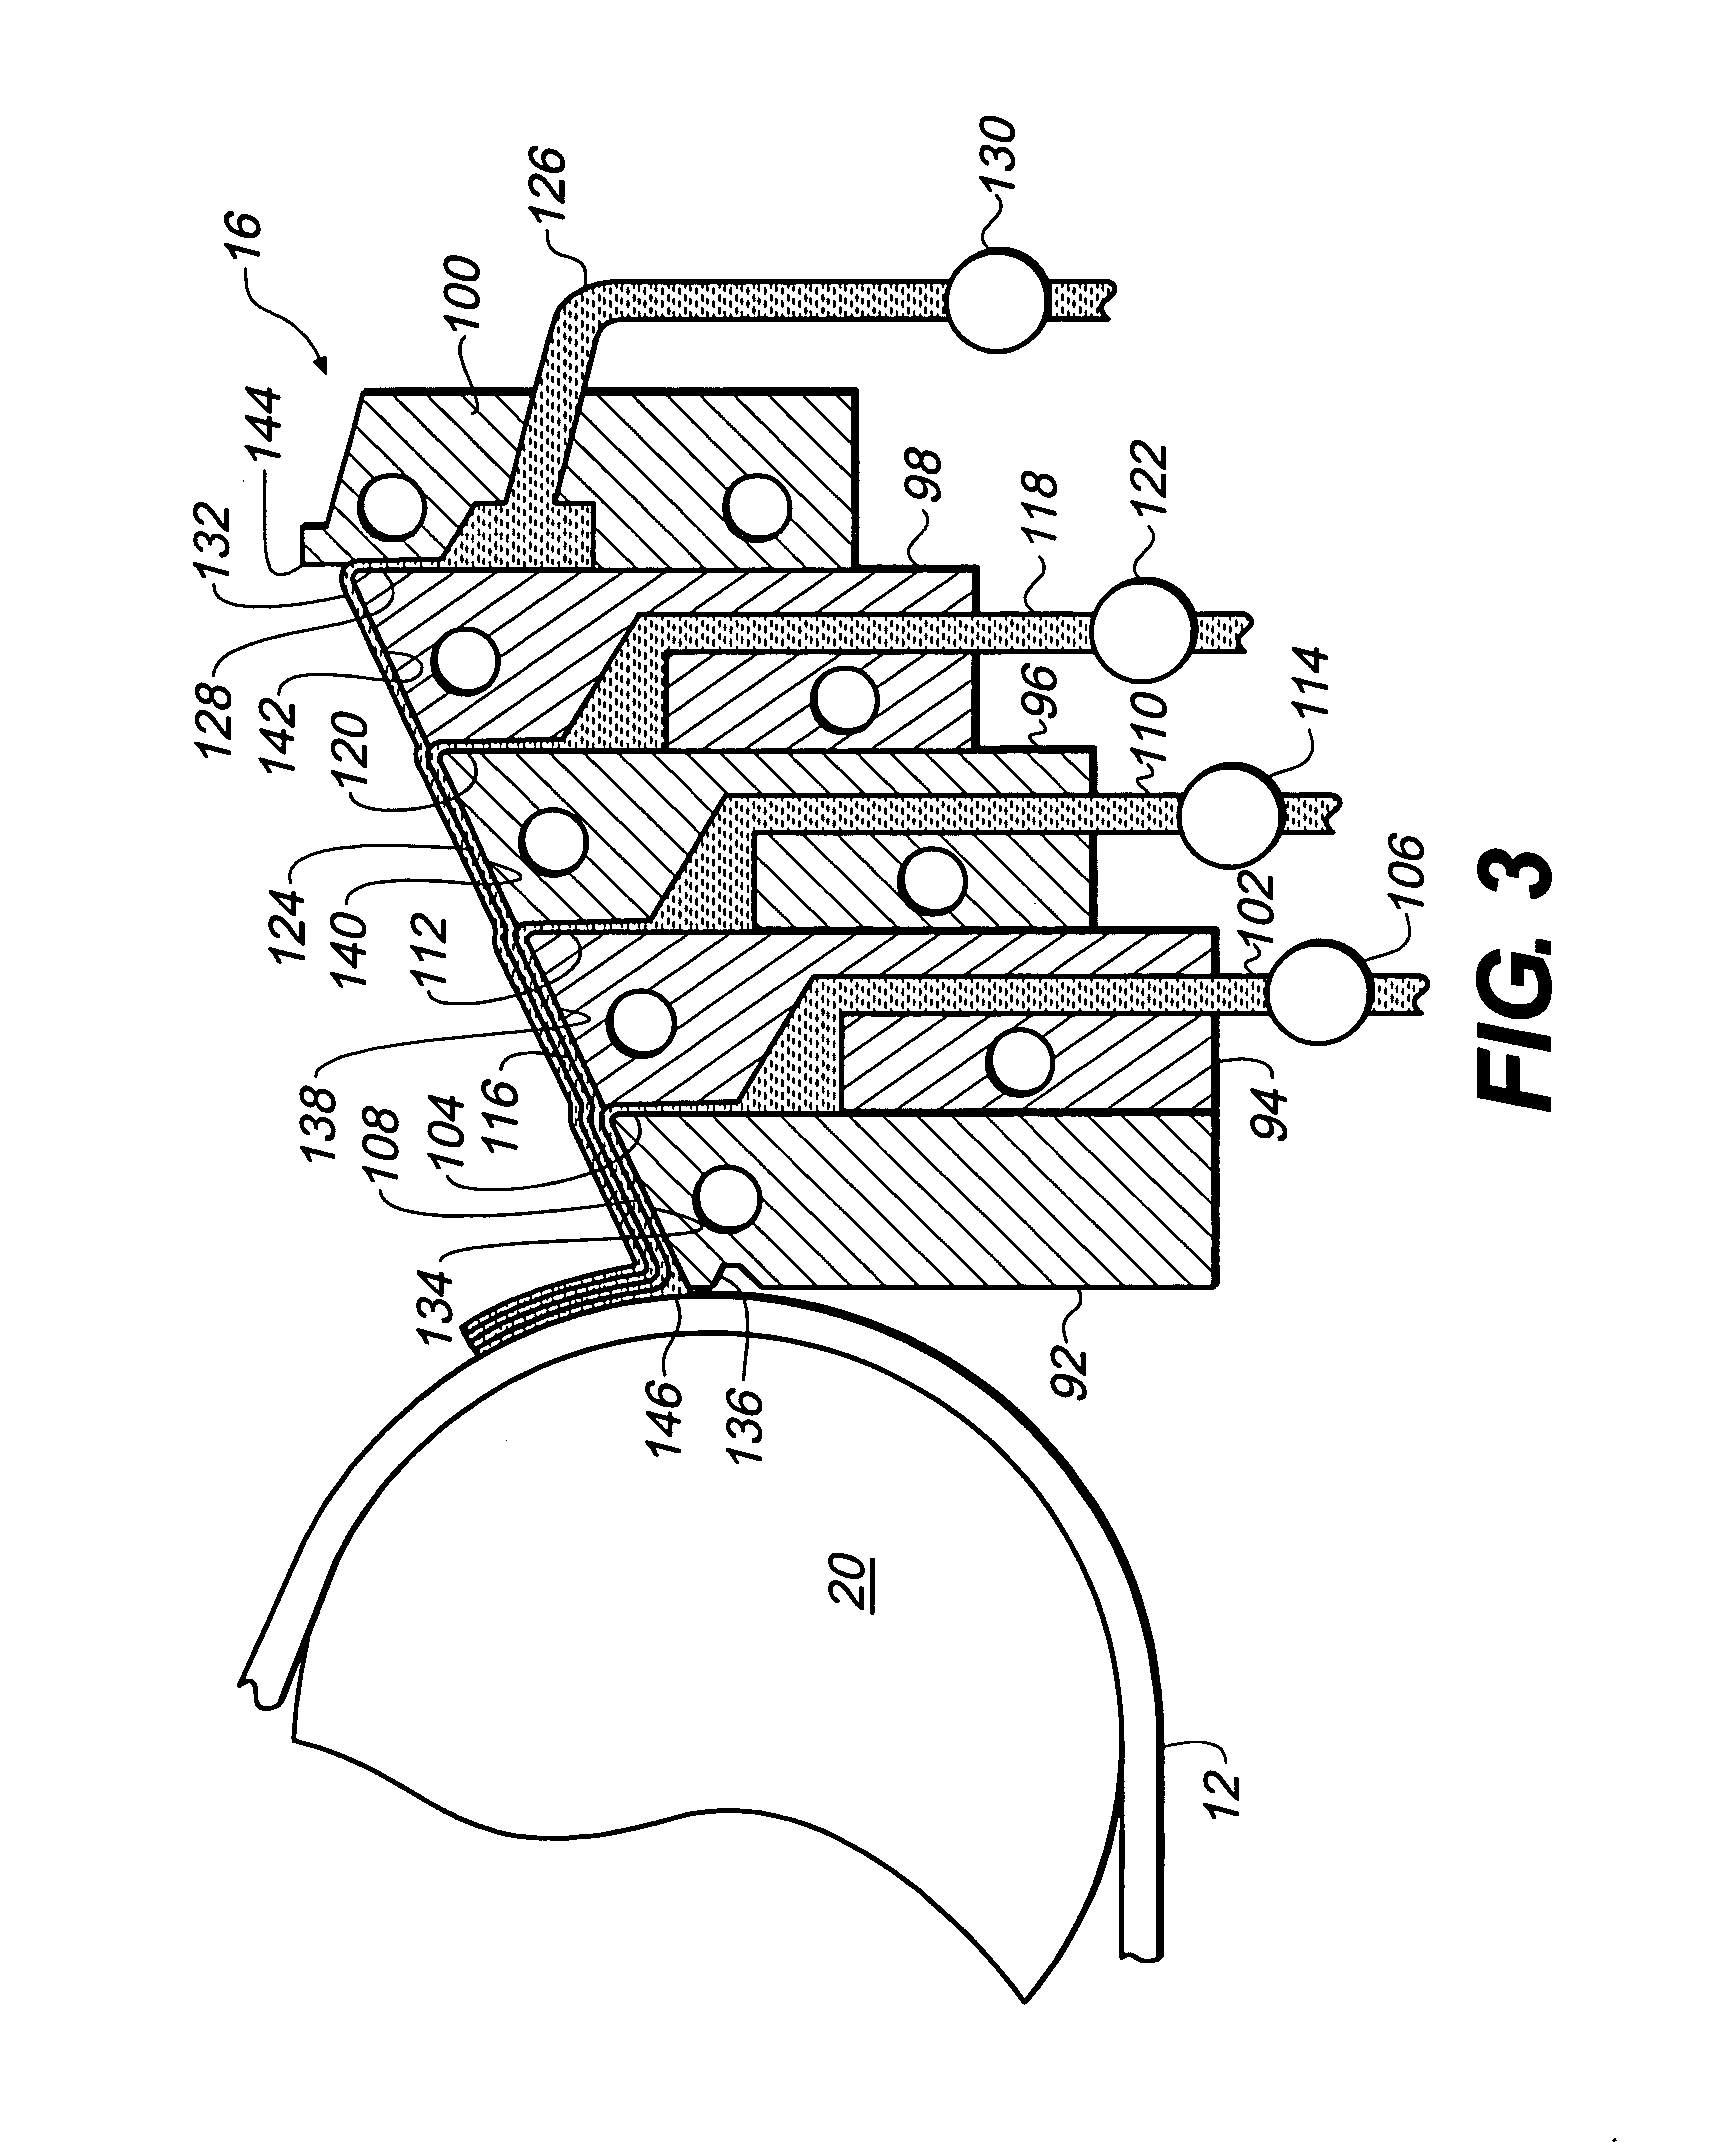 Cover sheet comprising tie layer for polarizer and method of manufacturing the same